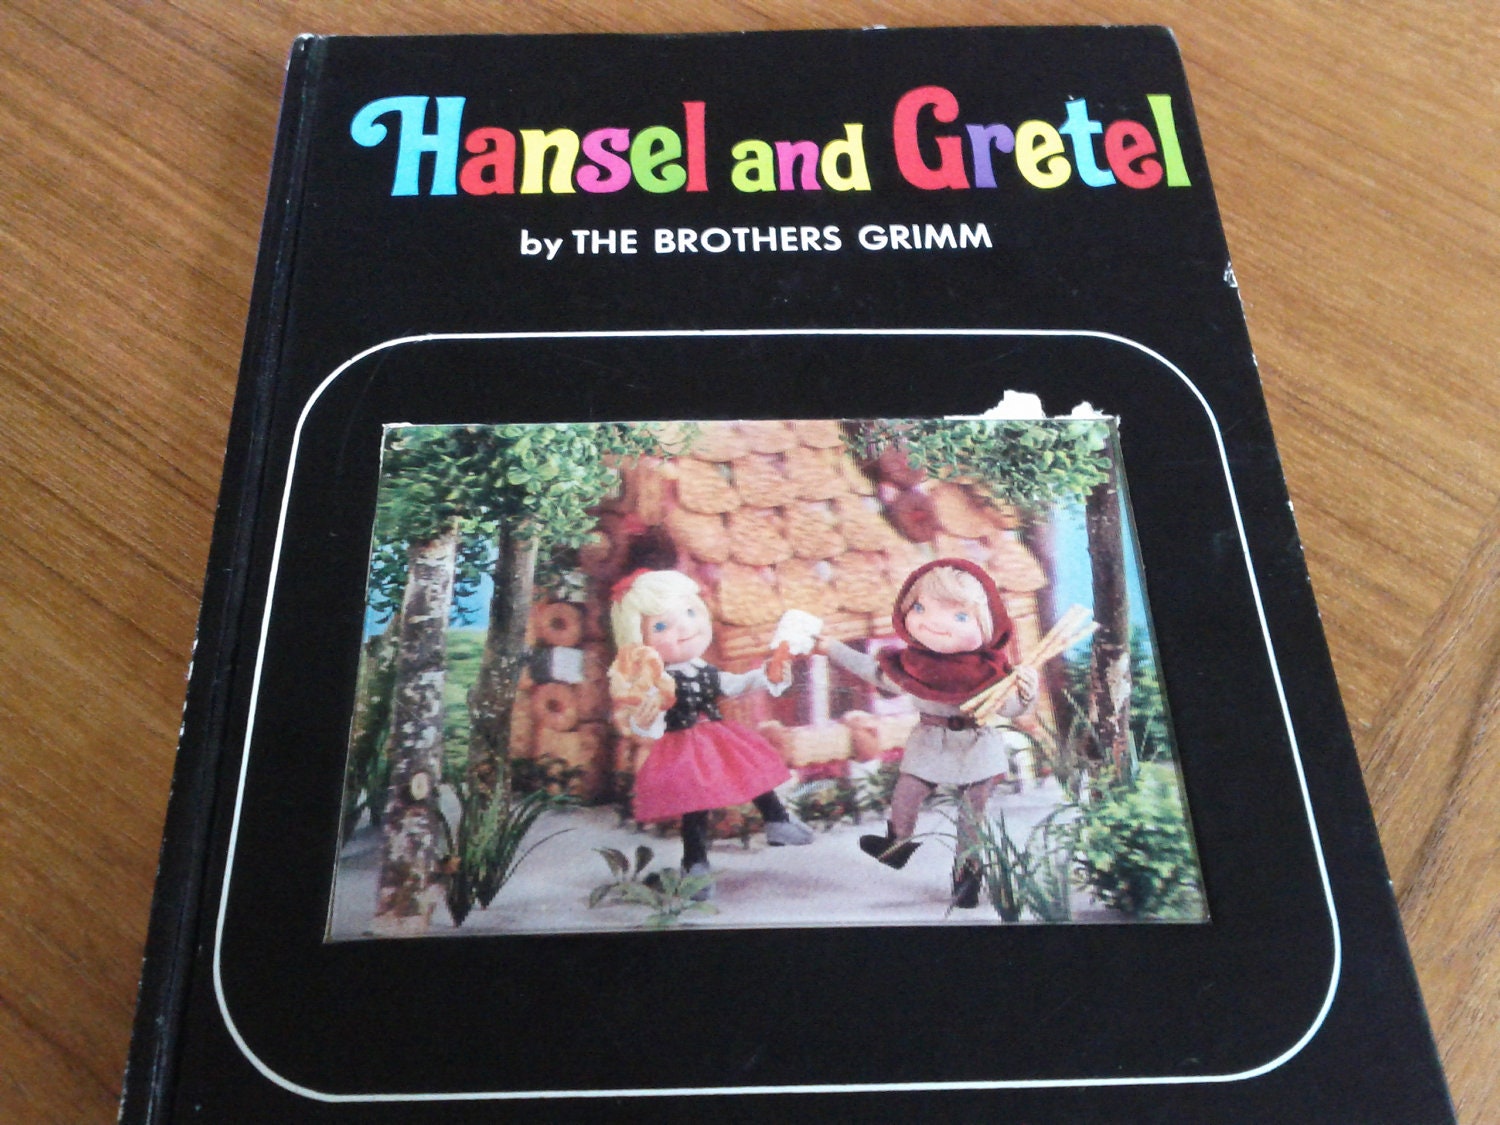 Vintage 1960s Hansel and Gretel Board Book 3D Hologram Cover1500 x 1125